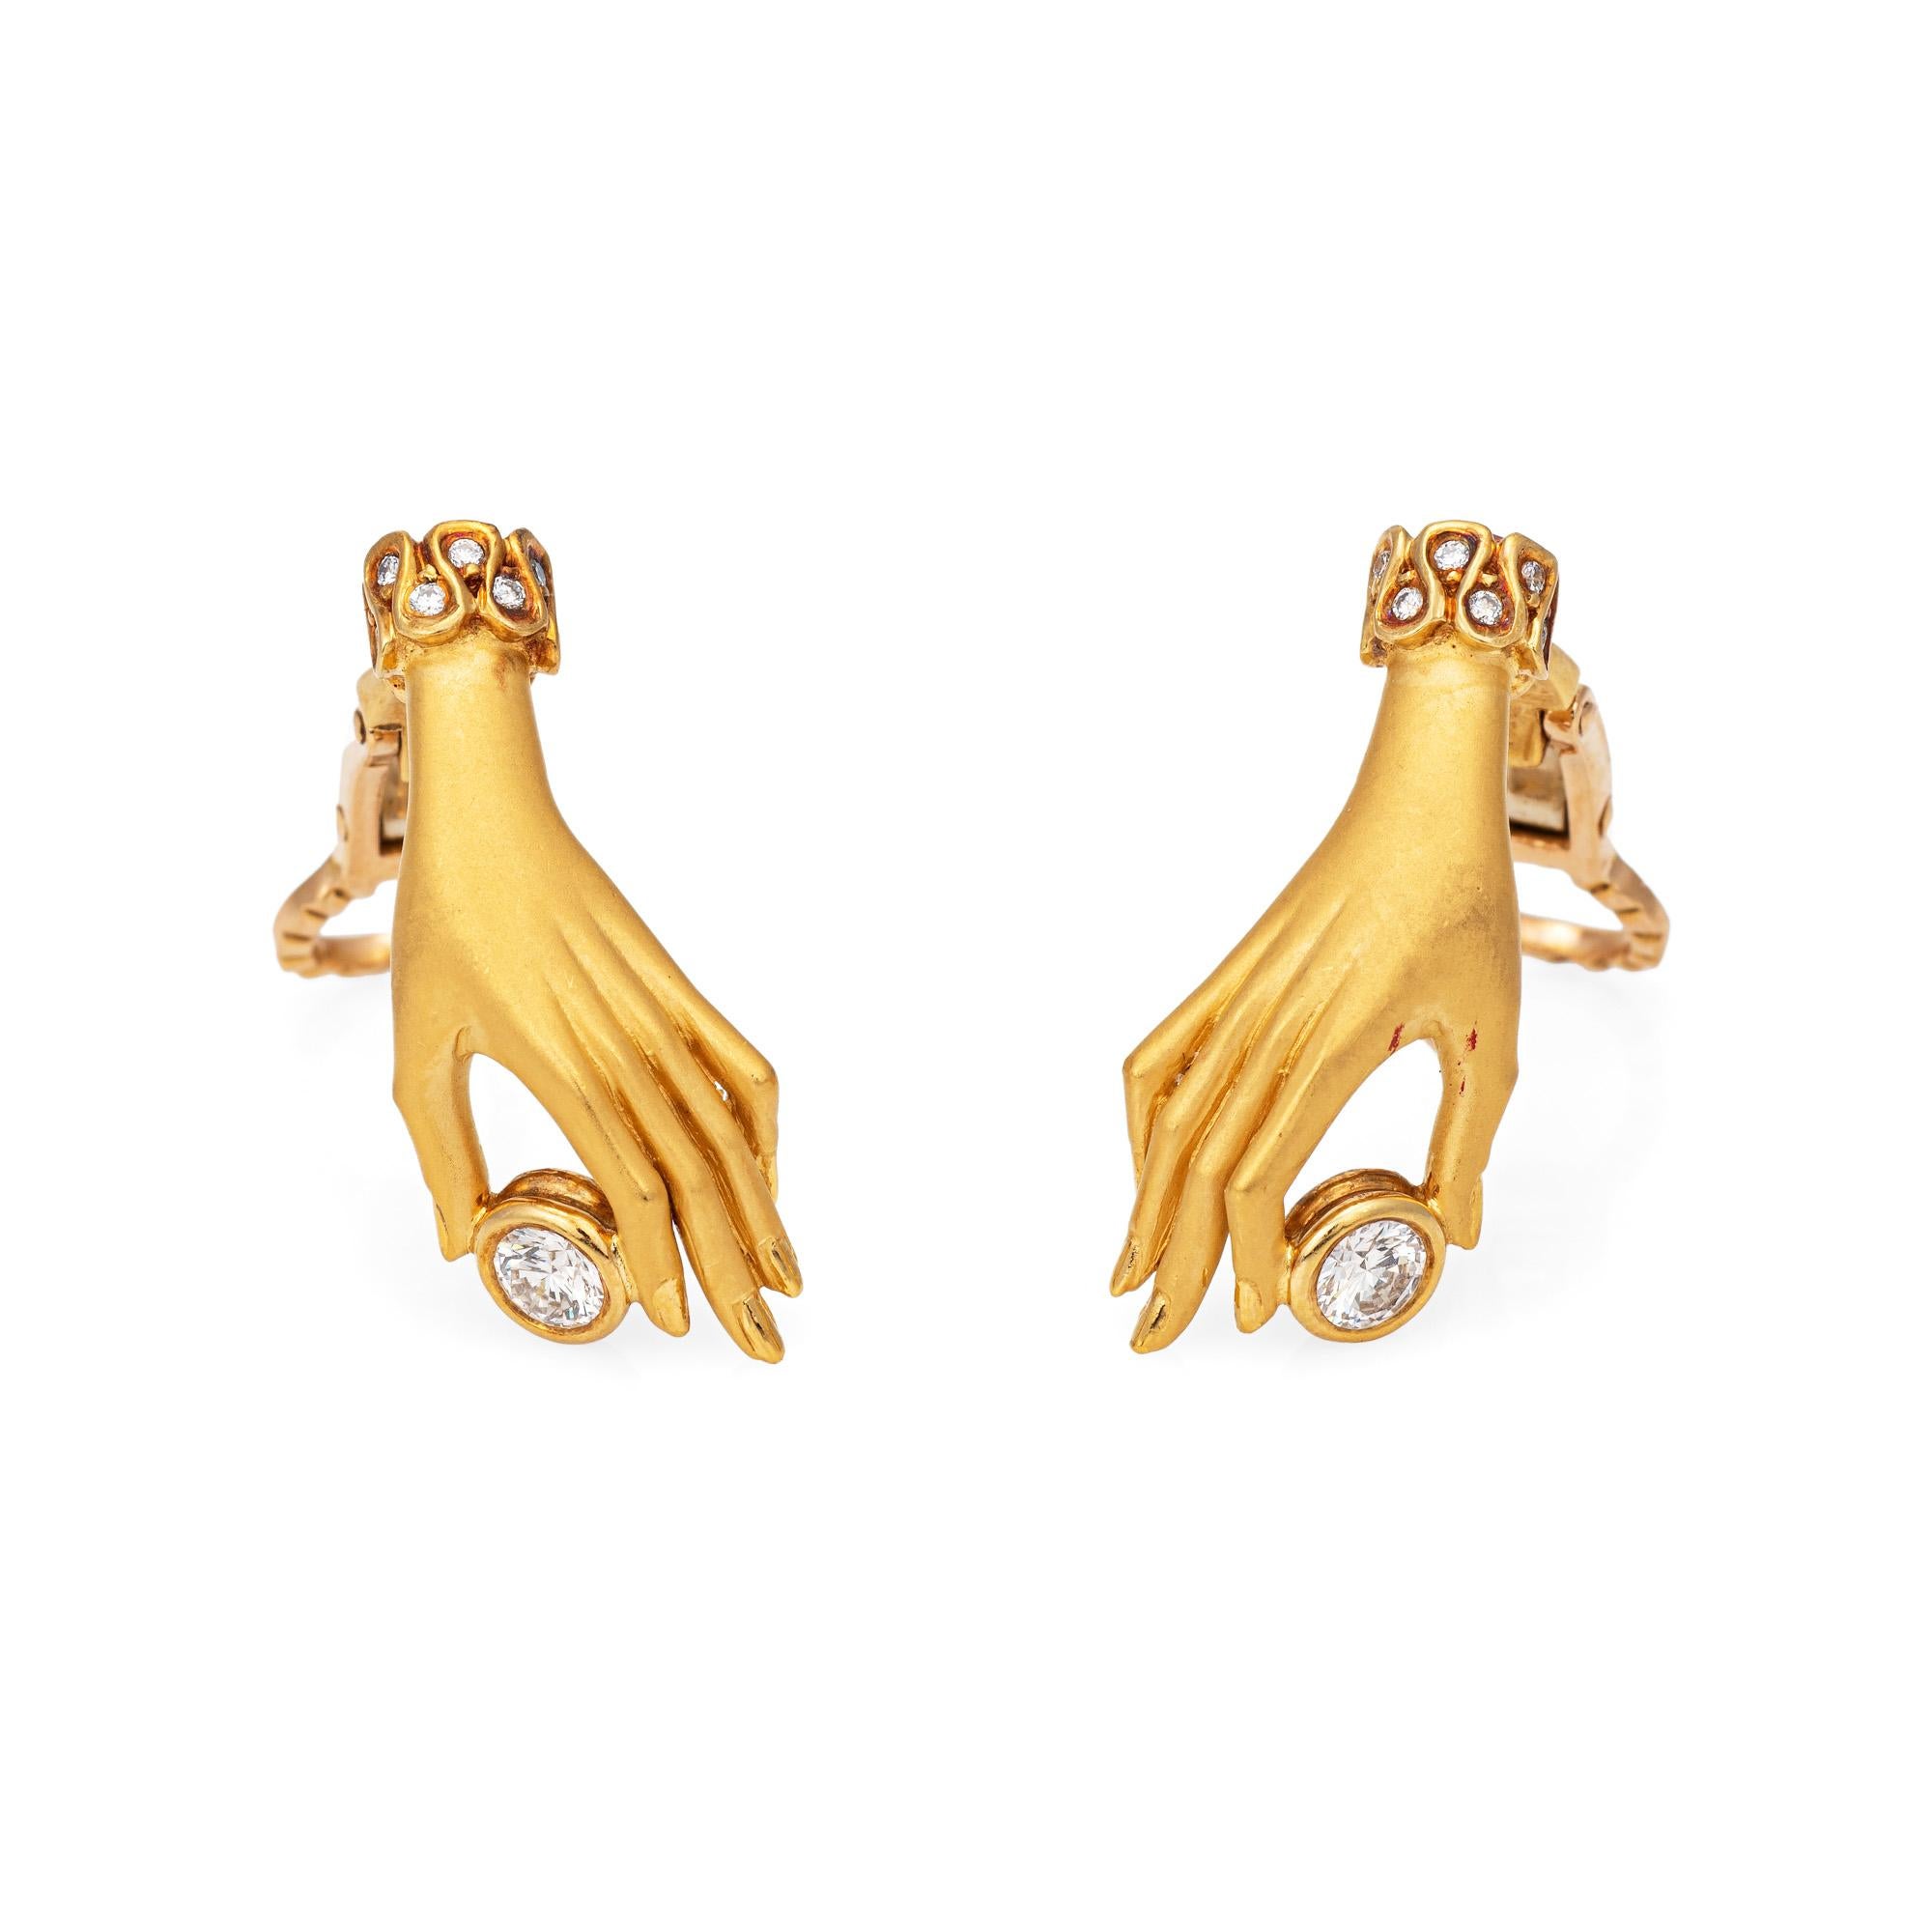 Estate Carrera y Carrera diamond hand earrings crafted in 18 karat yellow gold (circa 2008).  

Diamonds total an estimated 0.35 carats (estimated at H-I color and VS2-SI1 clarity)

The beautifully detailed earrings highlight elegant hands in matte